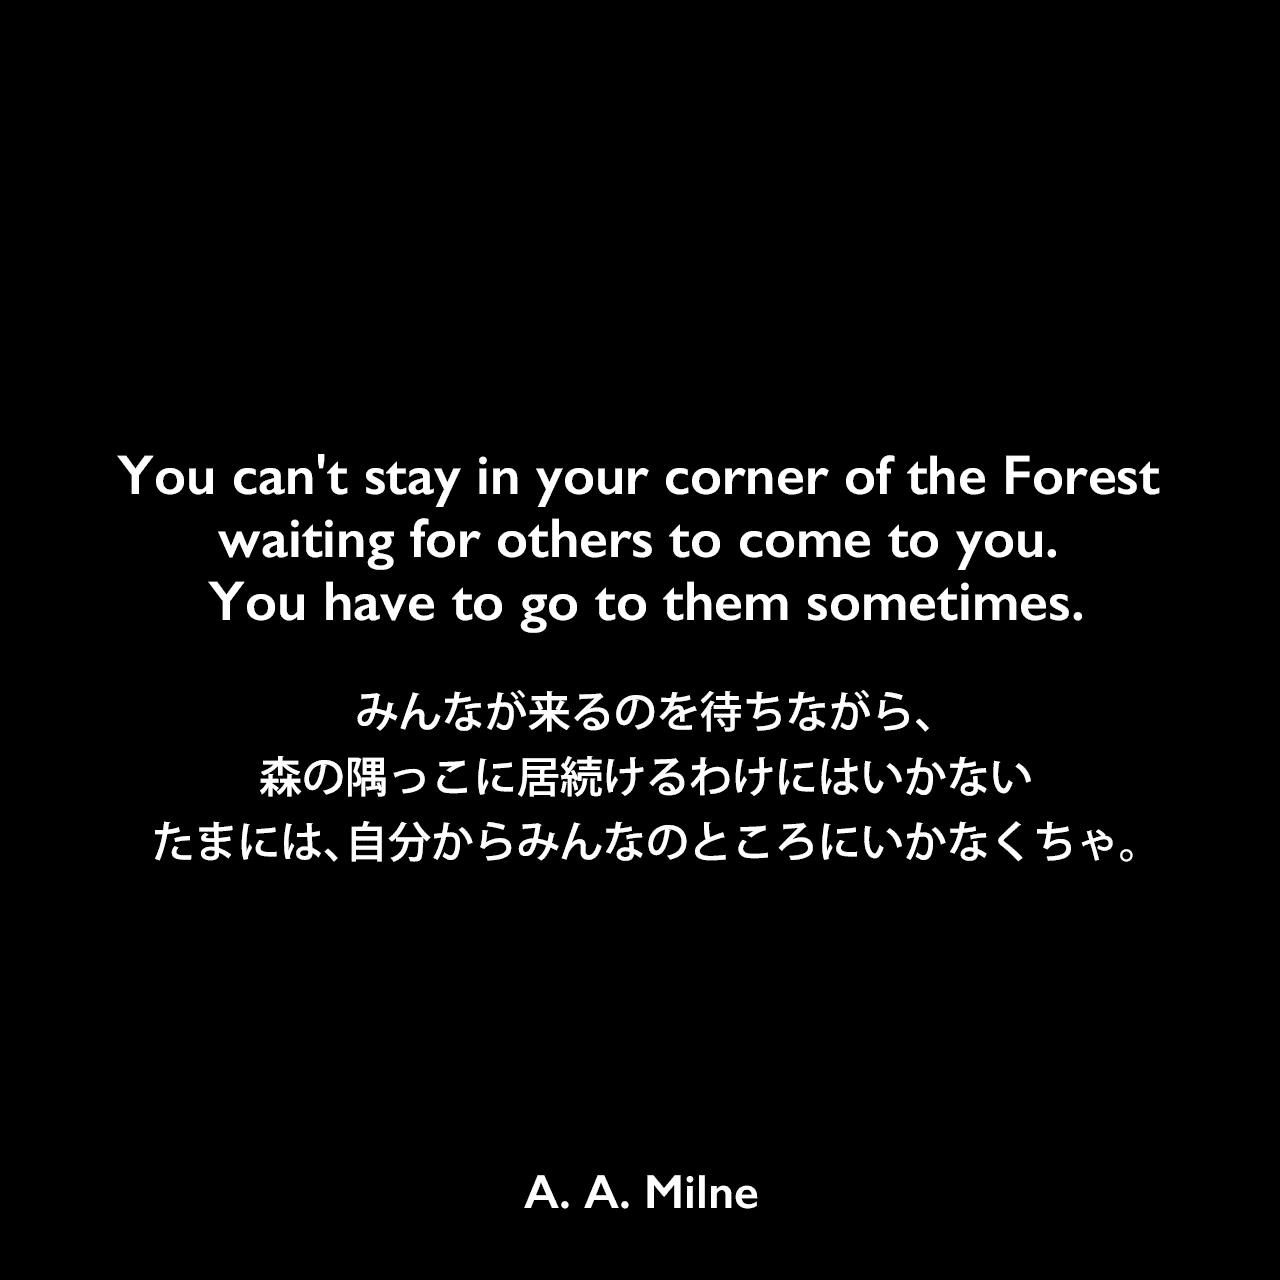 You can't stay in your corner of the Forest waiting for others to come to you. You have to go to them sometimes.みんなが来るのを待ちながら、森の隅っこに居続けるわけにはいかない たまには、自分からみんなのところにいかなくちゃ。A. A. Milne